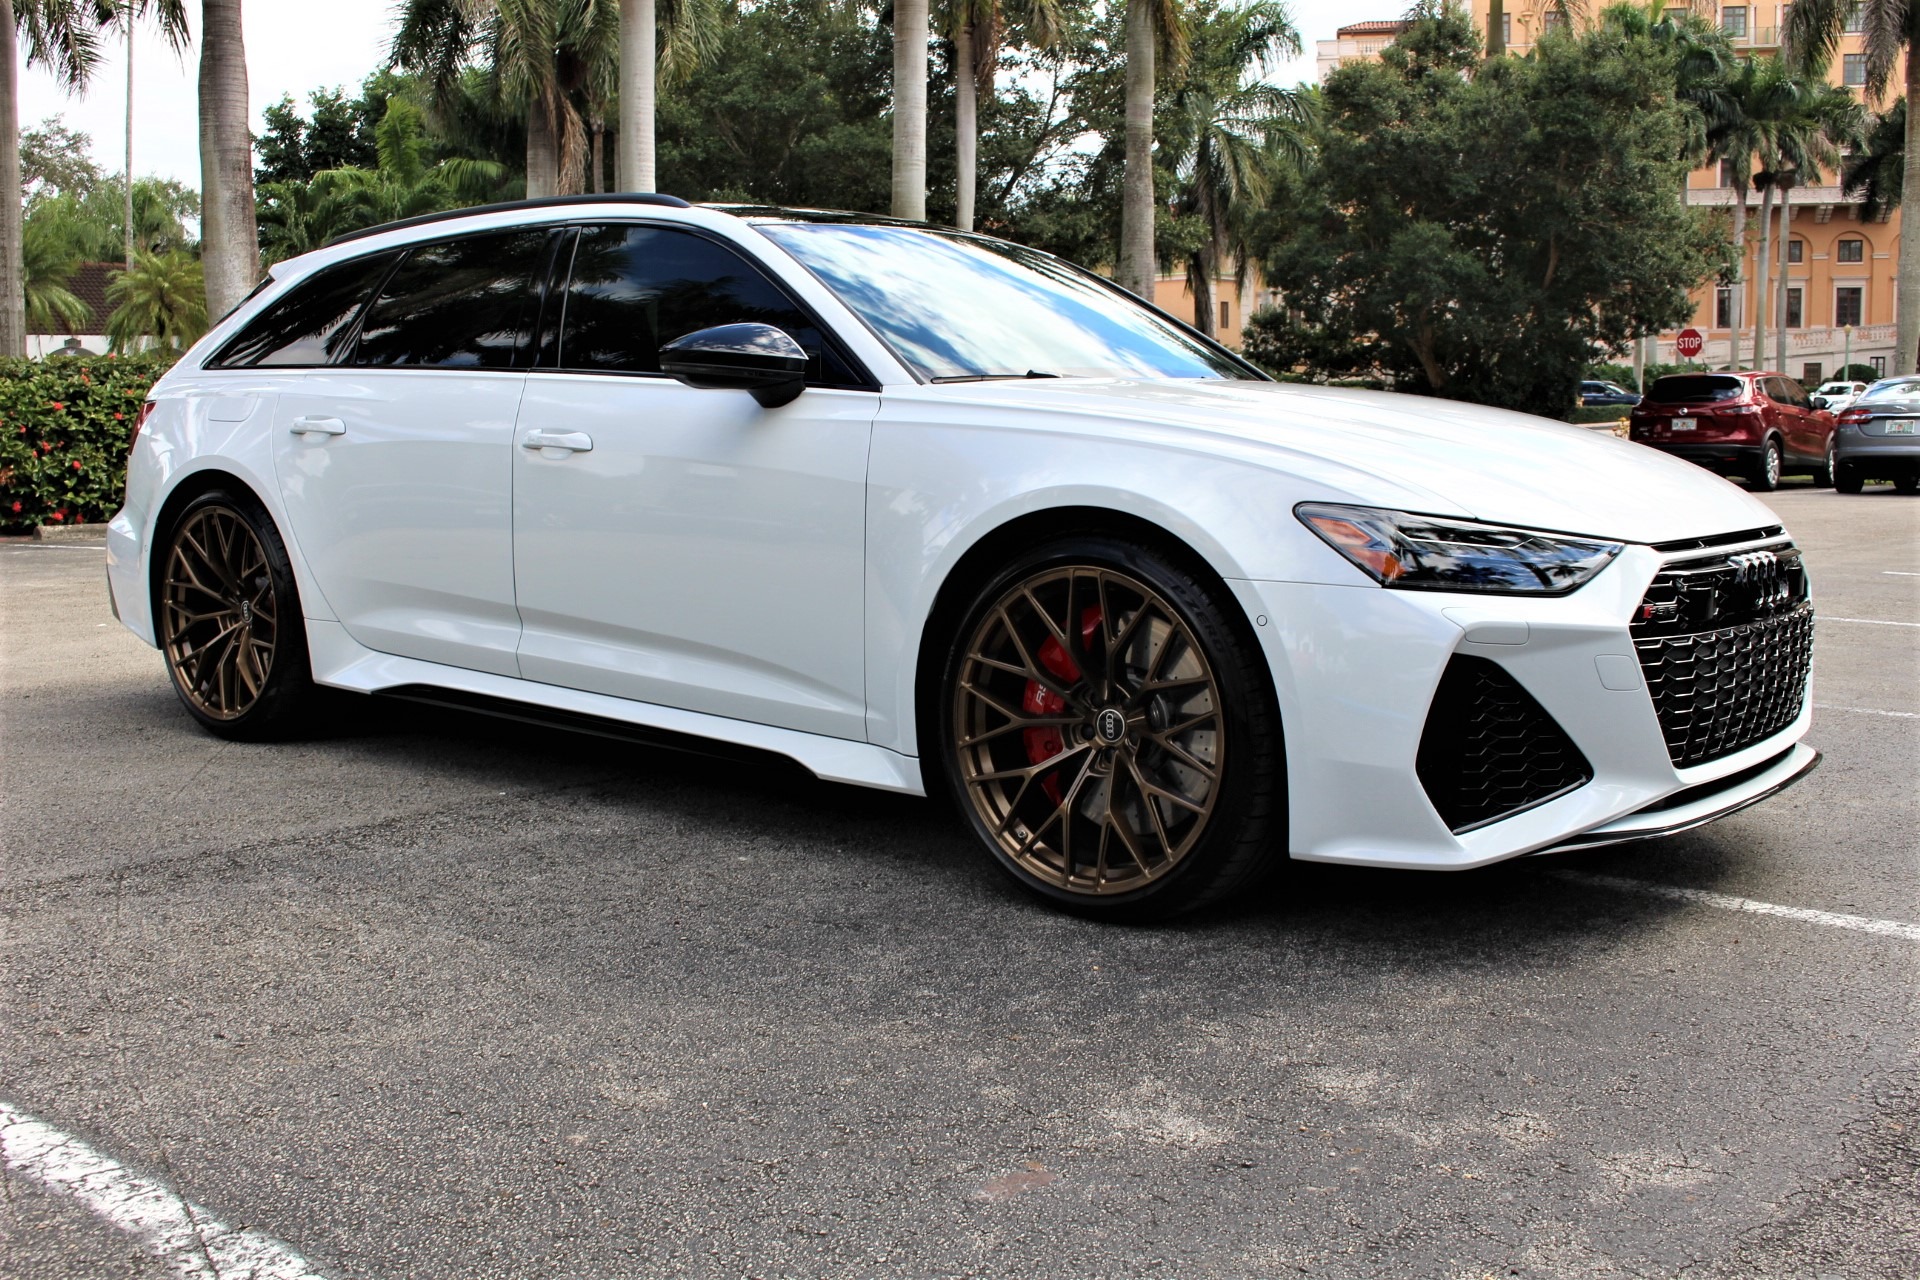 Used 2021 Audi RS 6 Avant 4.0T quattro Avant for sale Sold at The Gables Sports Cars in Miami FL 33146 2